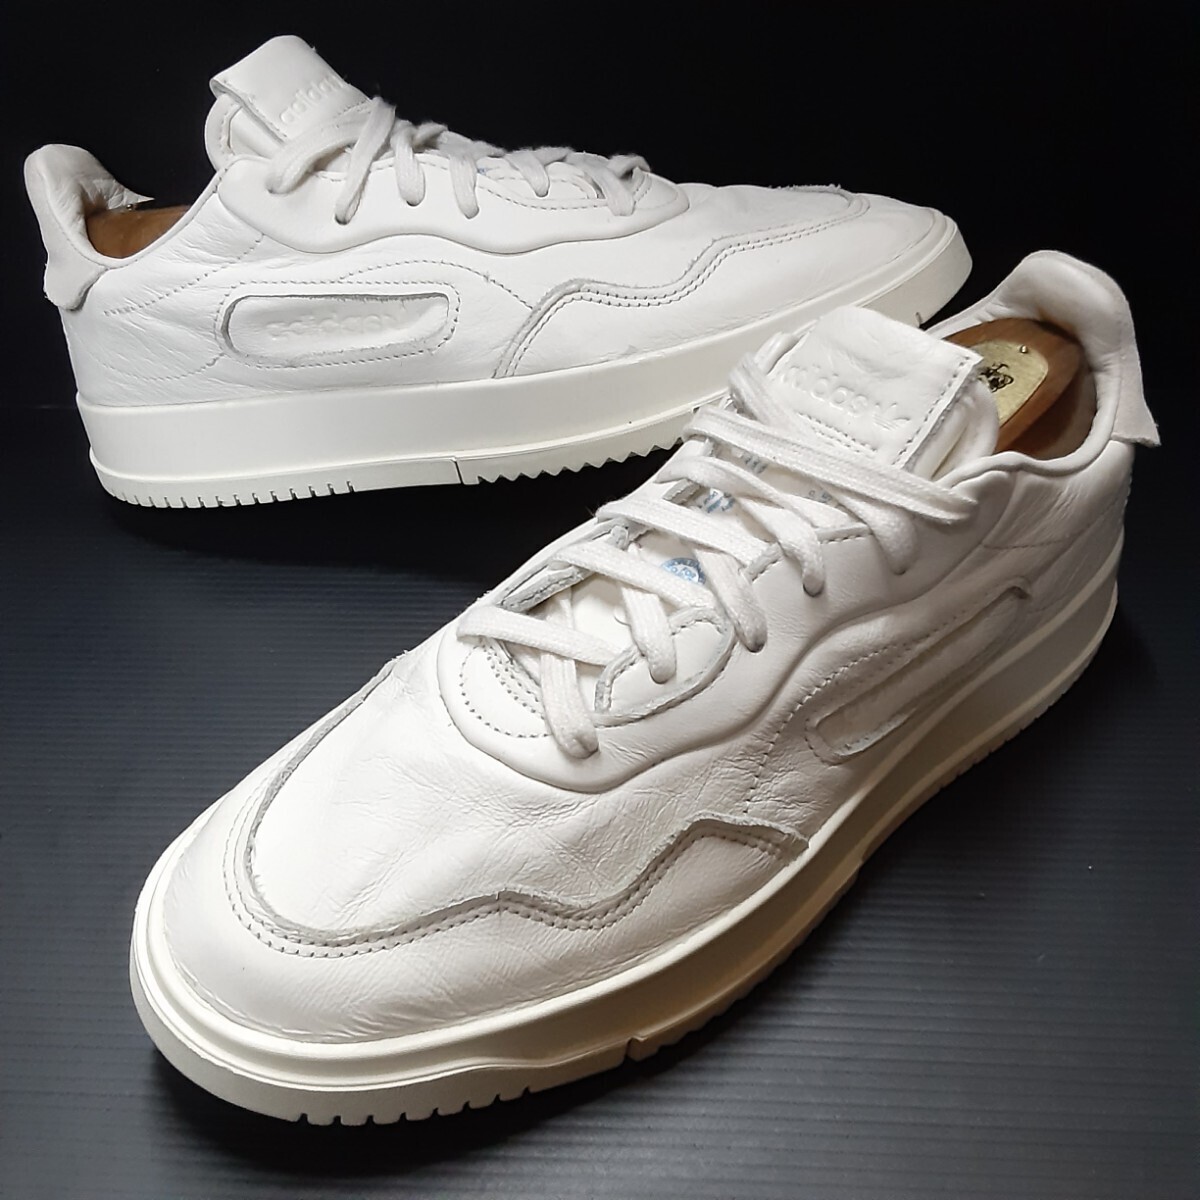  most price!.14300 jpy! masterpiece 90\'s Classic coat design! Adidas SC premium high-end kau leather sneakers! butter white! white 26.5cm